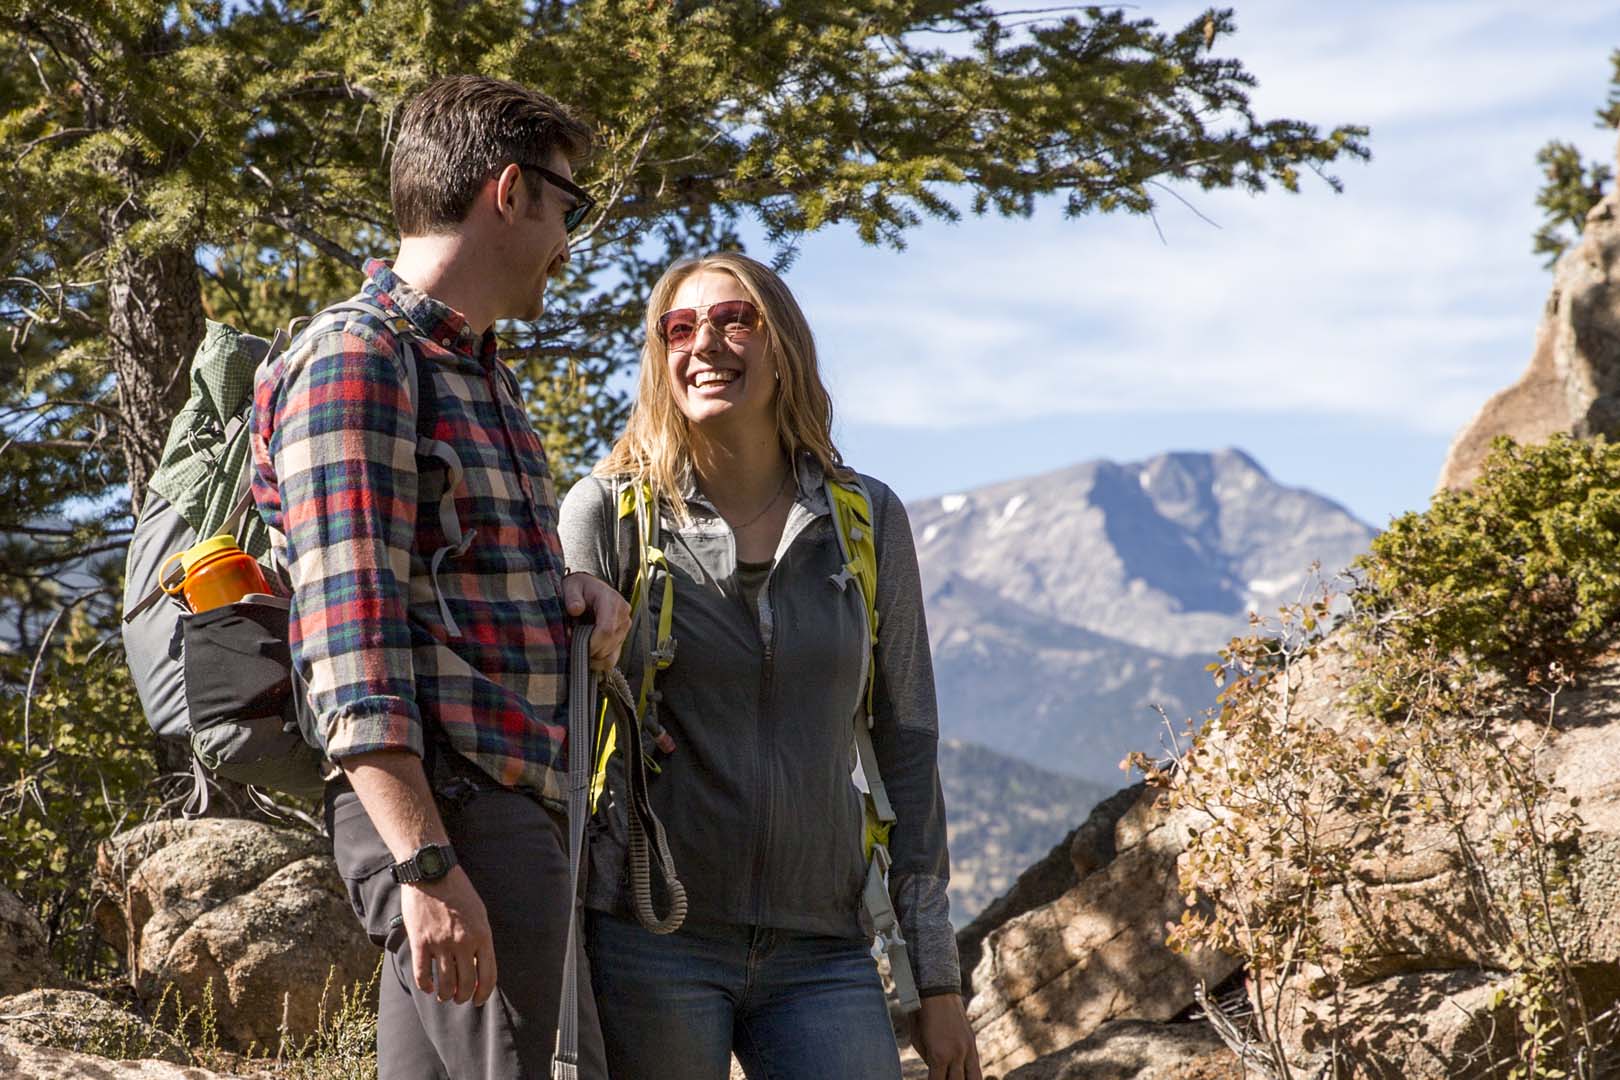 Man and woman on a hike with trees and mountains in the background